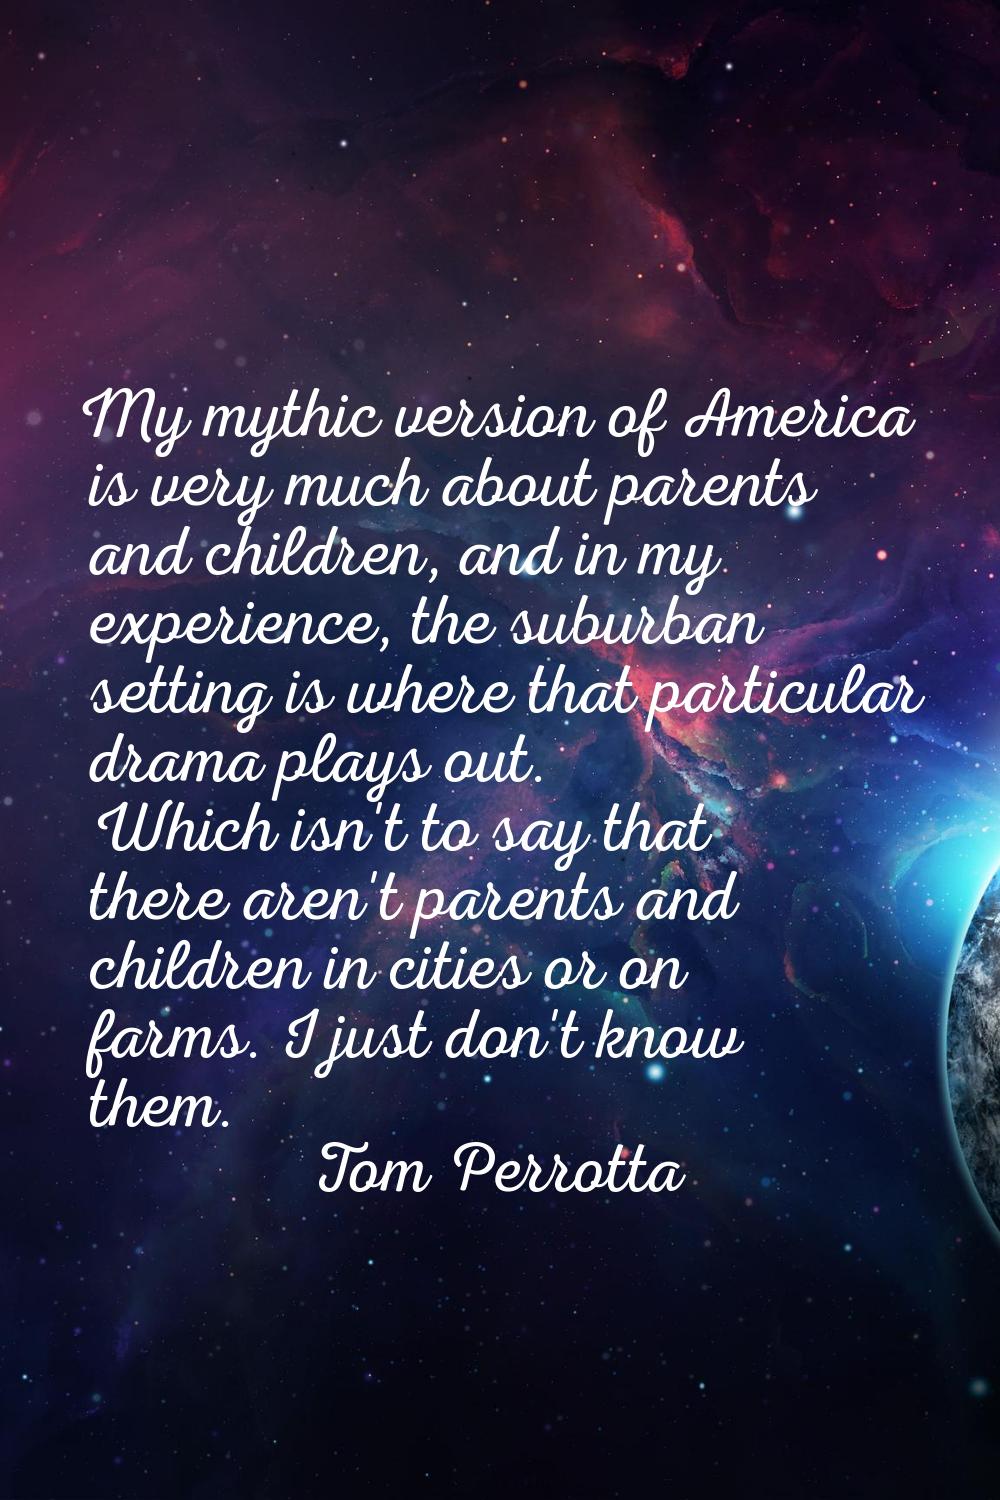 My mythic version of America is very much about parents and children, and in my experience, the sub